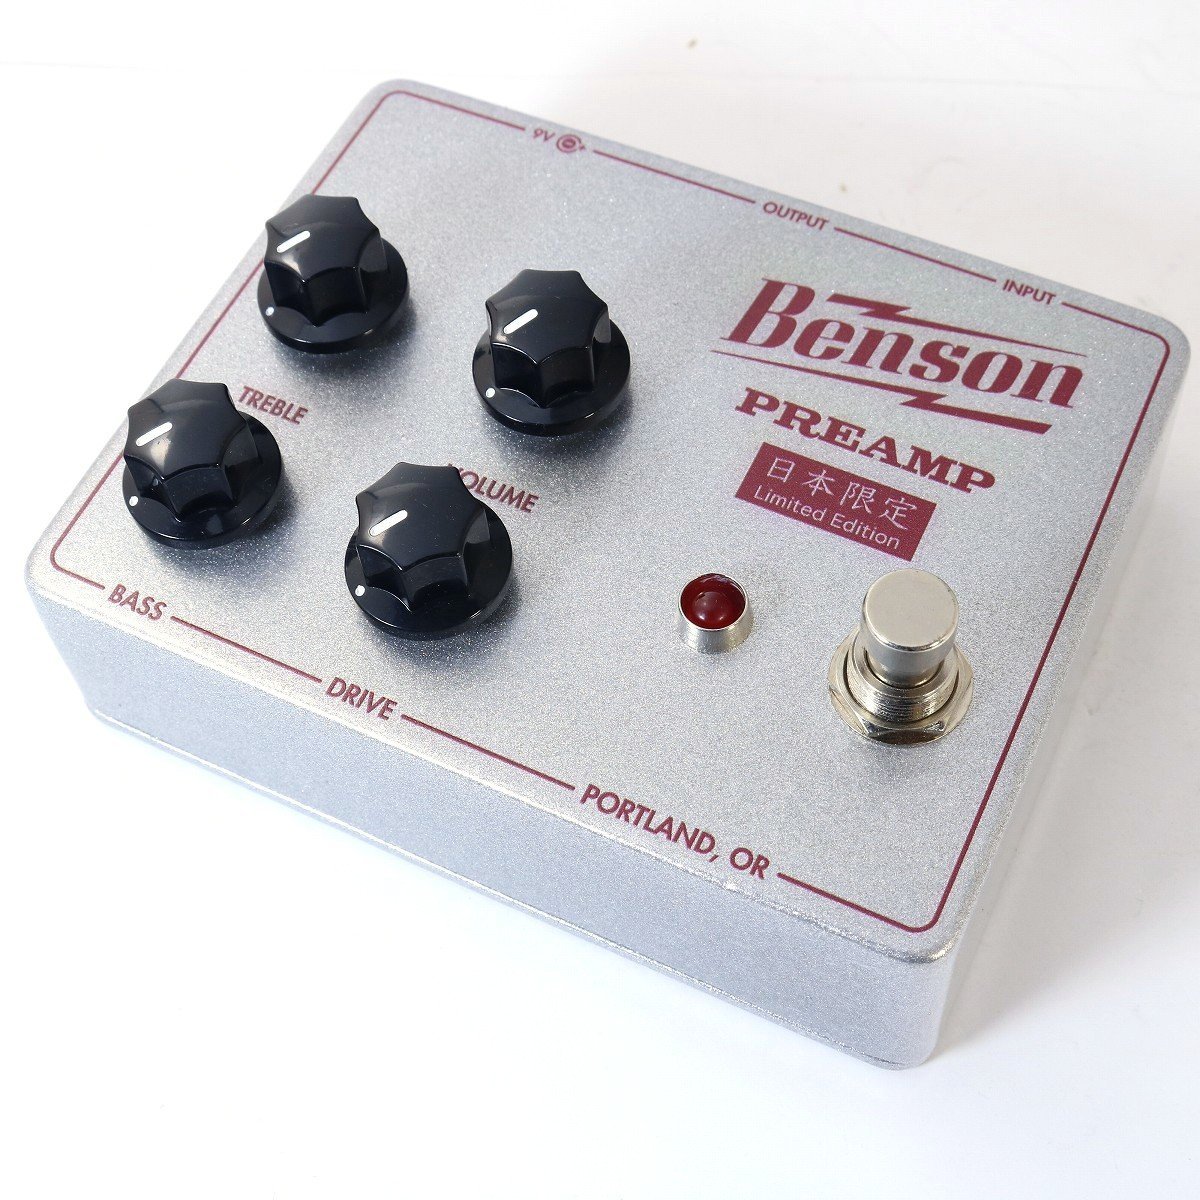 Benson Preamp Pedal Limited 日本限定ギター